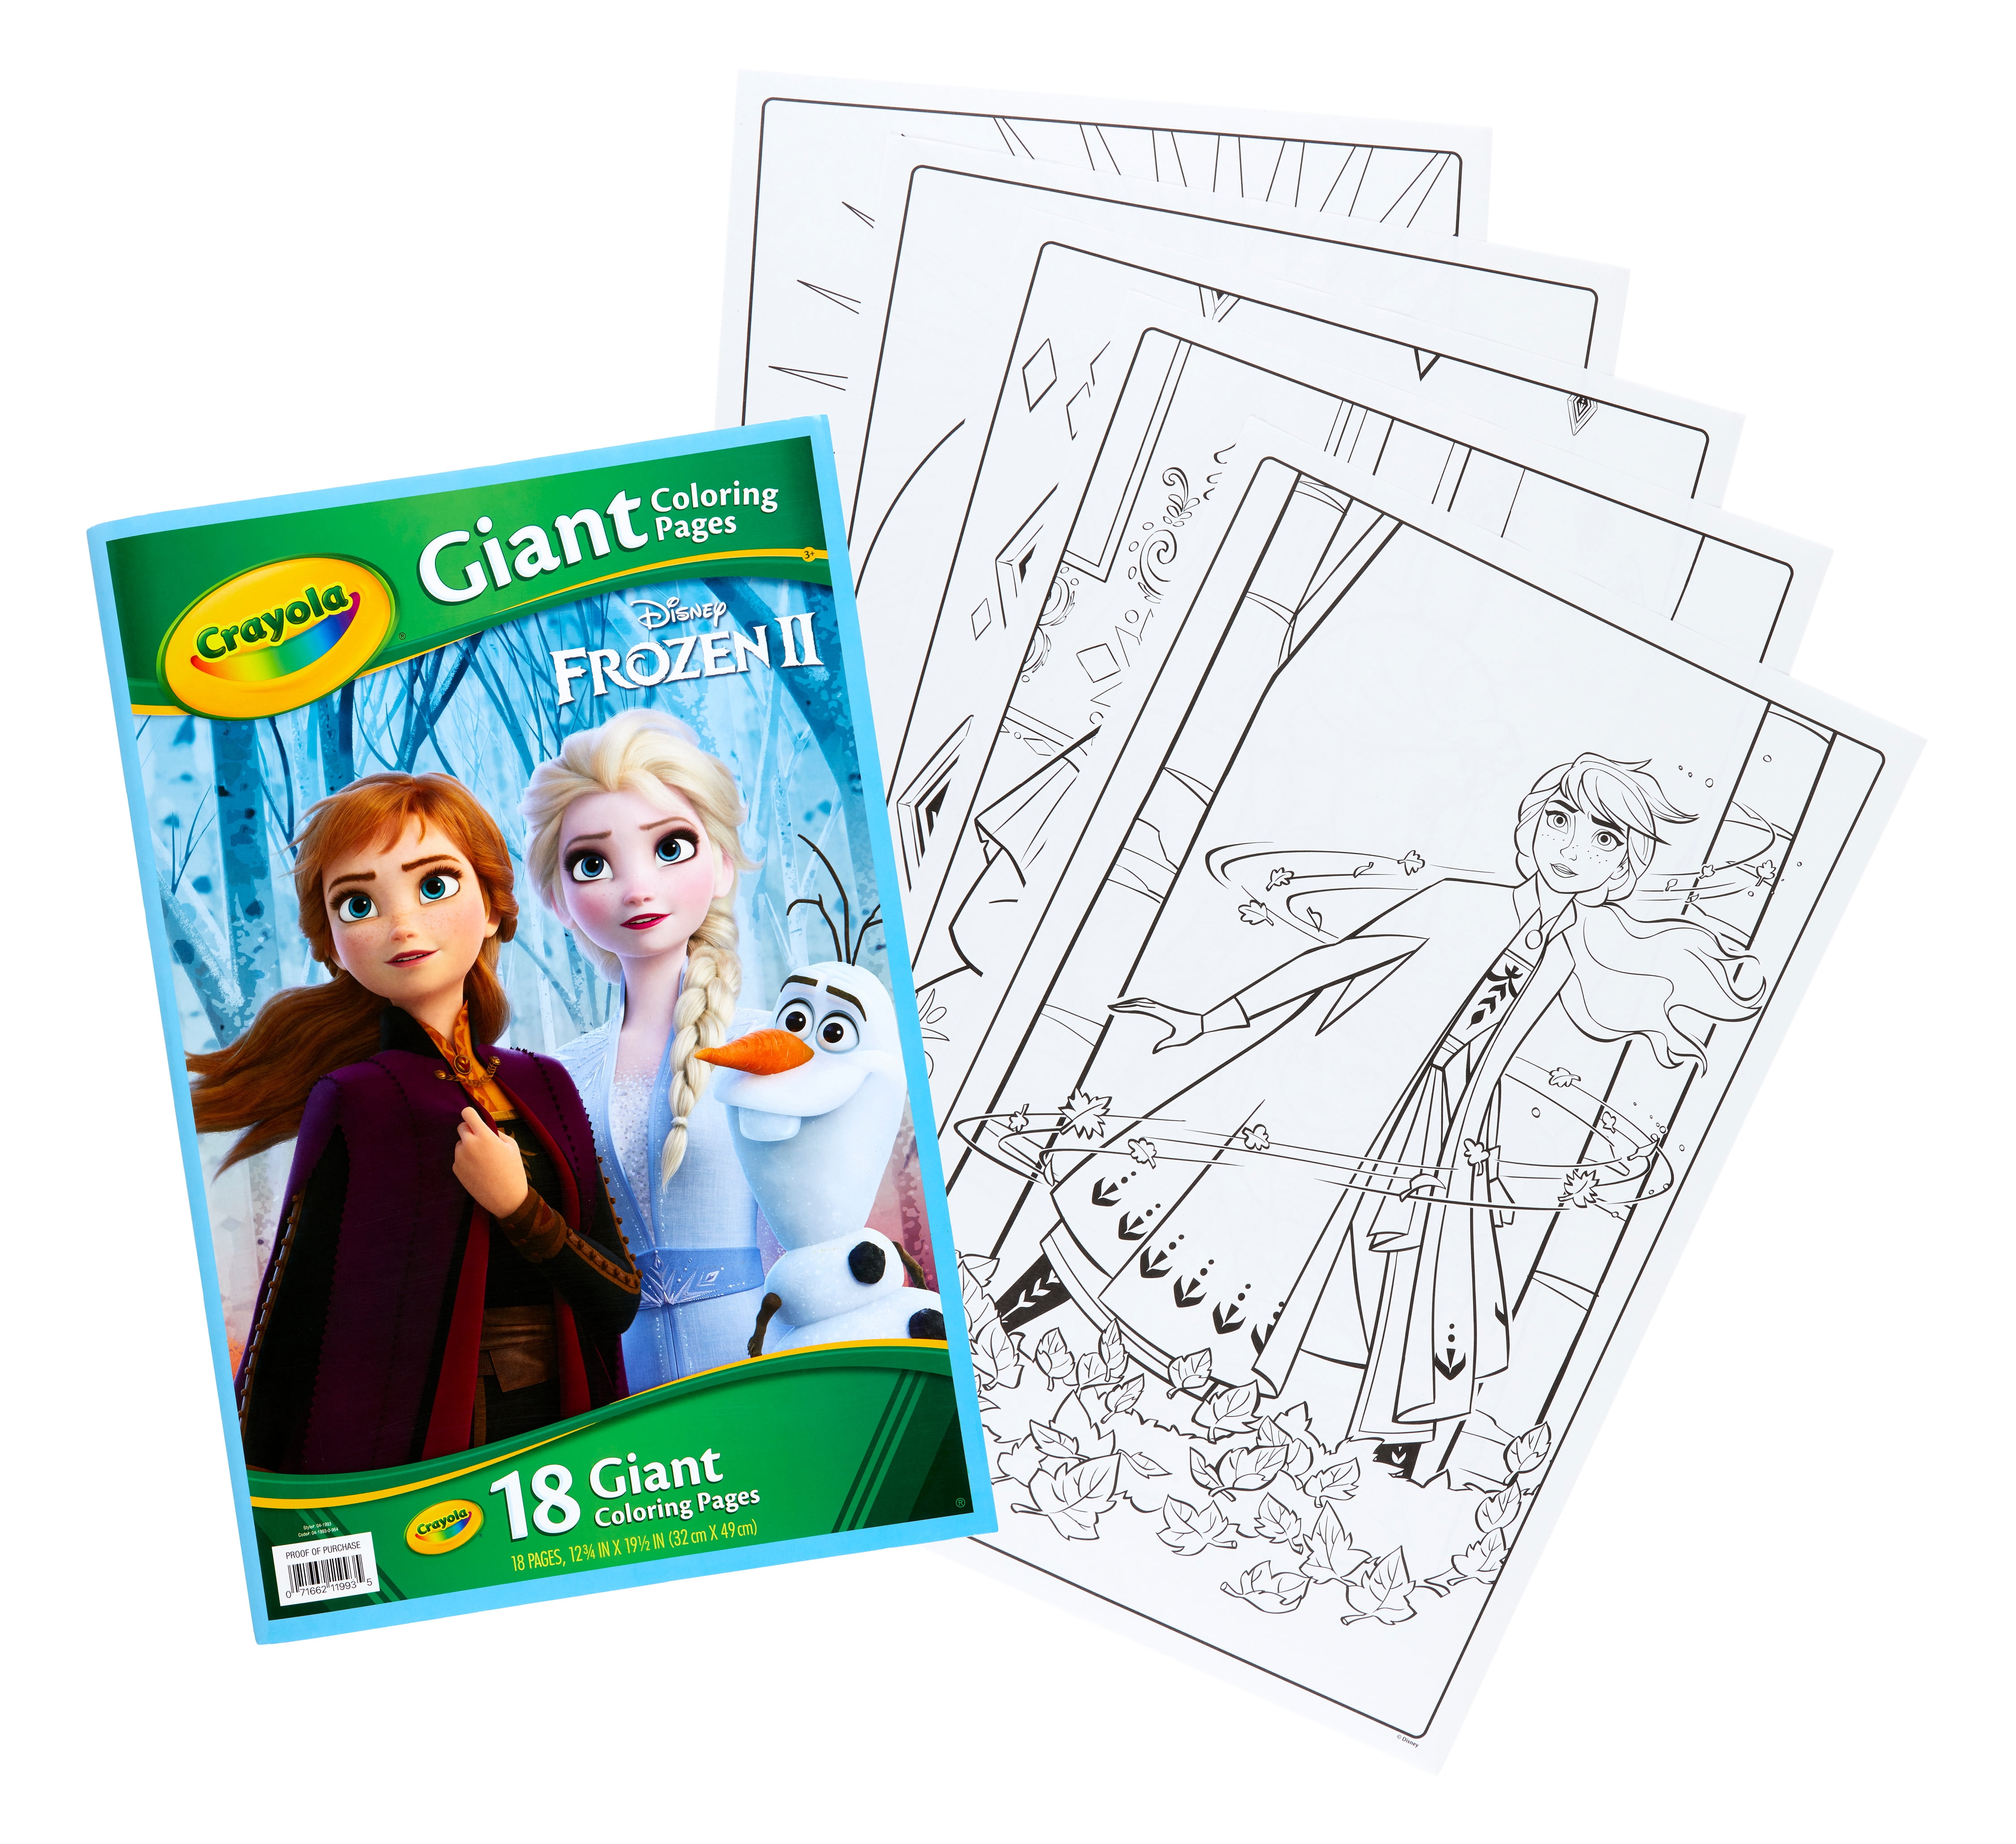 Crayola 18 Giant Coloring Pages